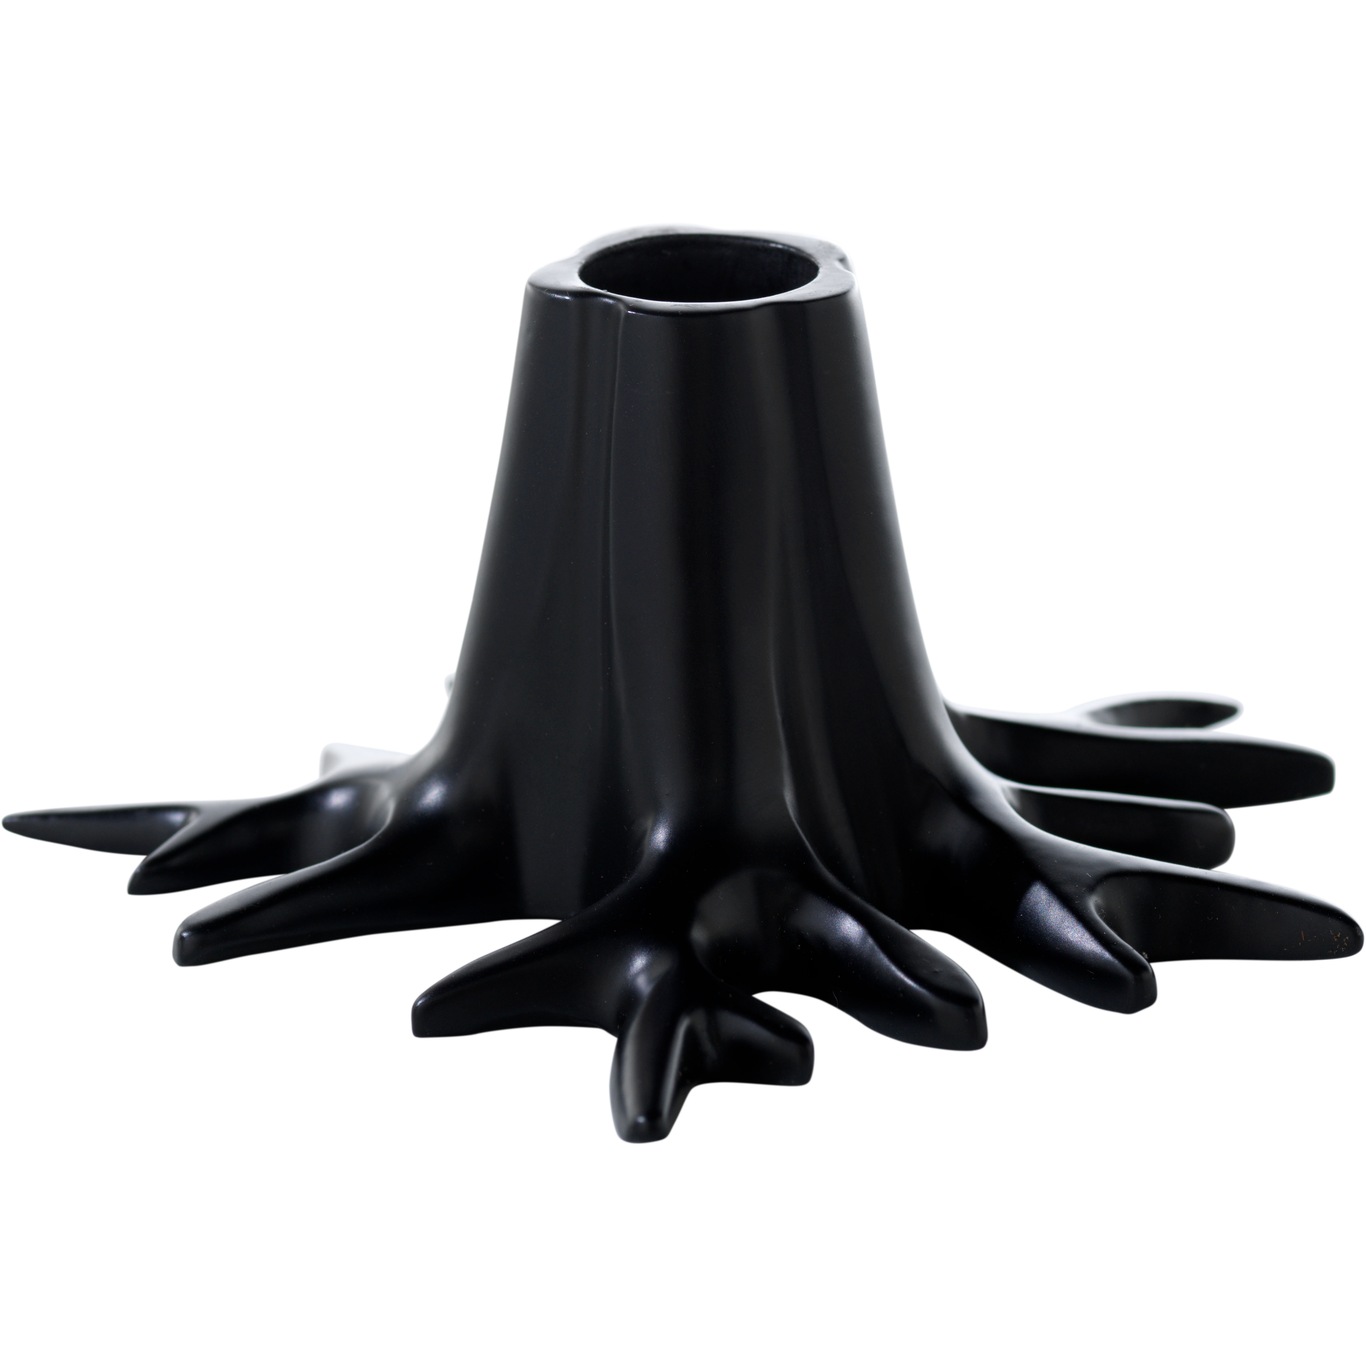 The Root Candle Holder, Black Matte